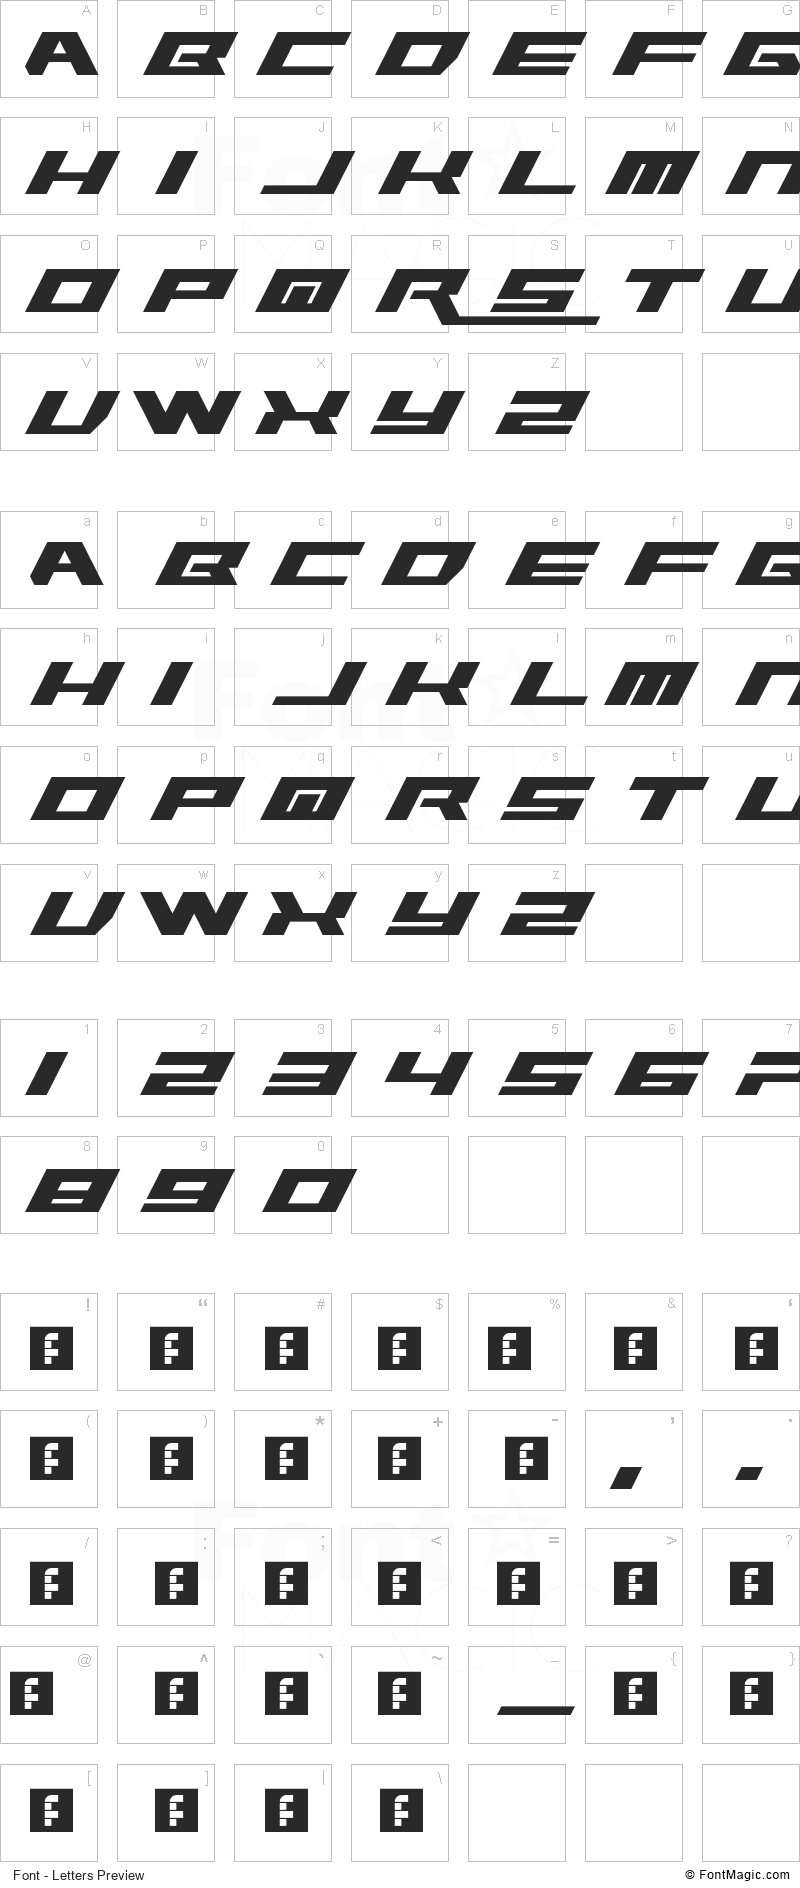 Rawhide Raw 2012 Font - All Latters Preview Chart